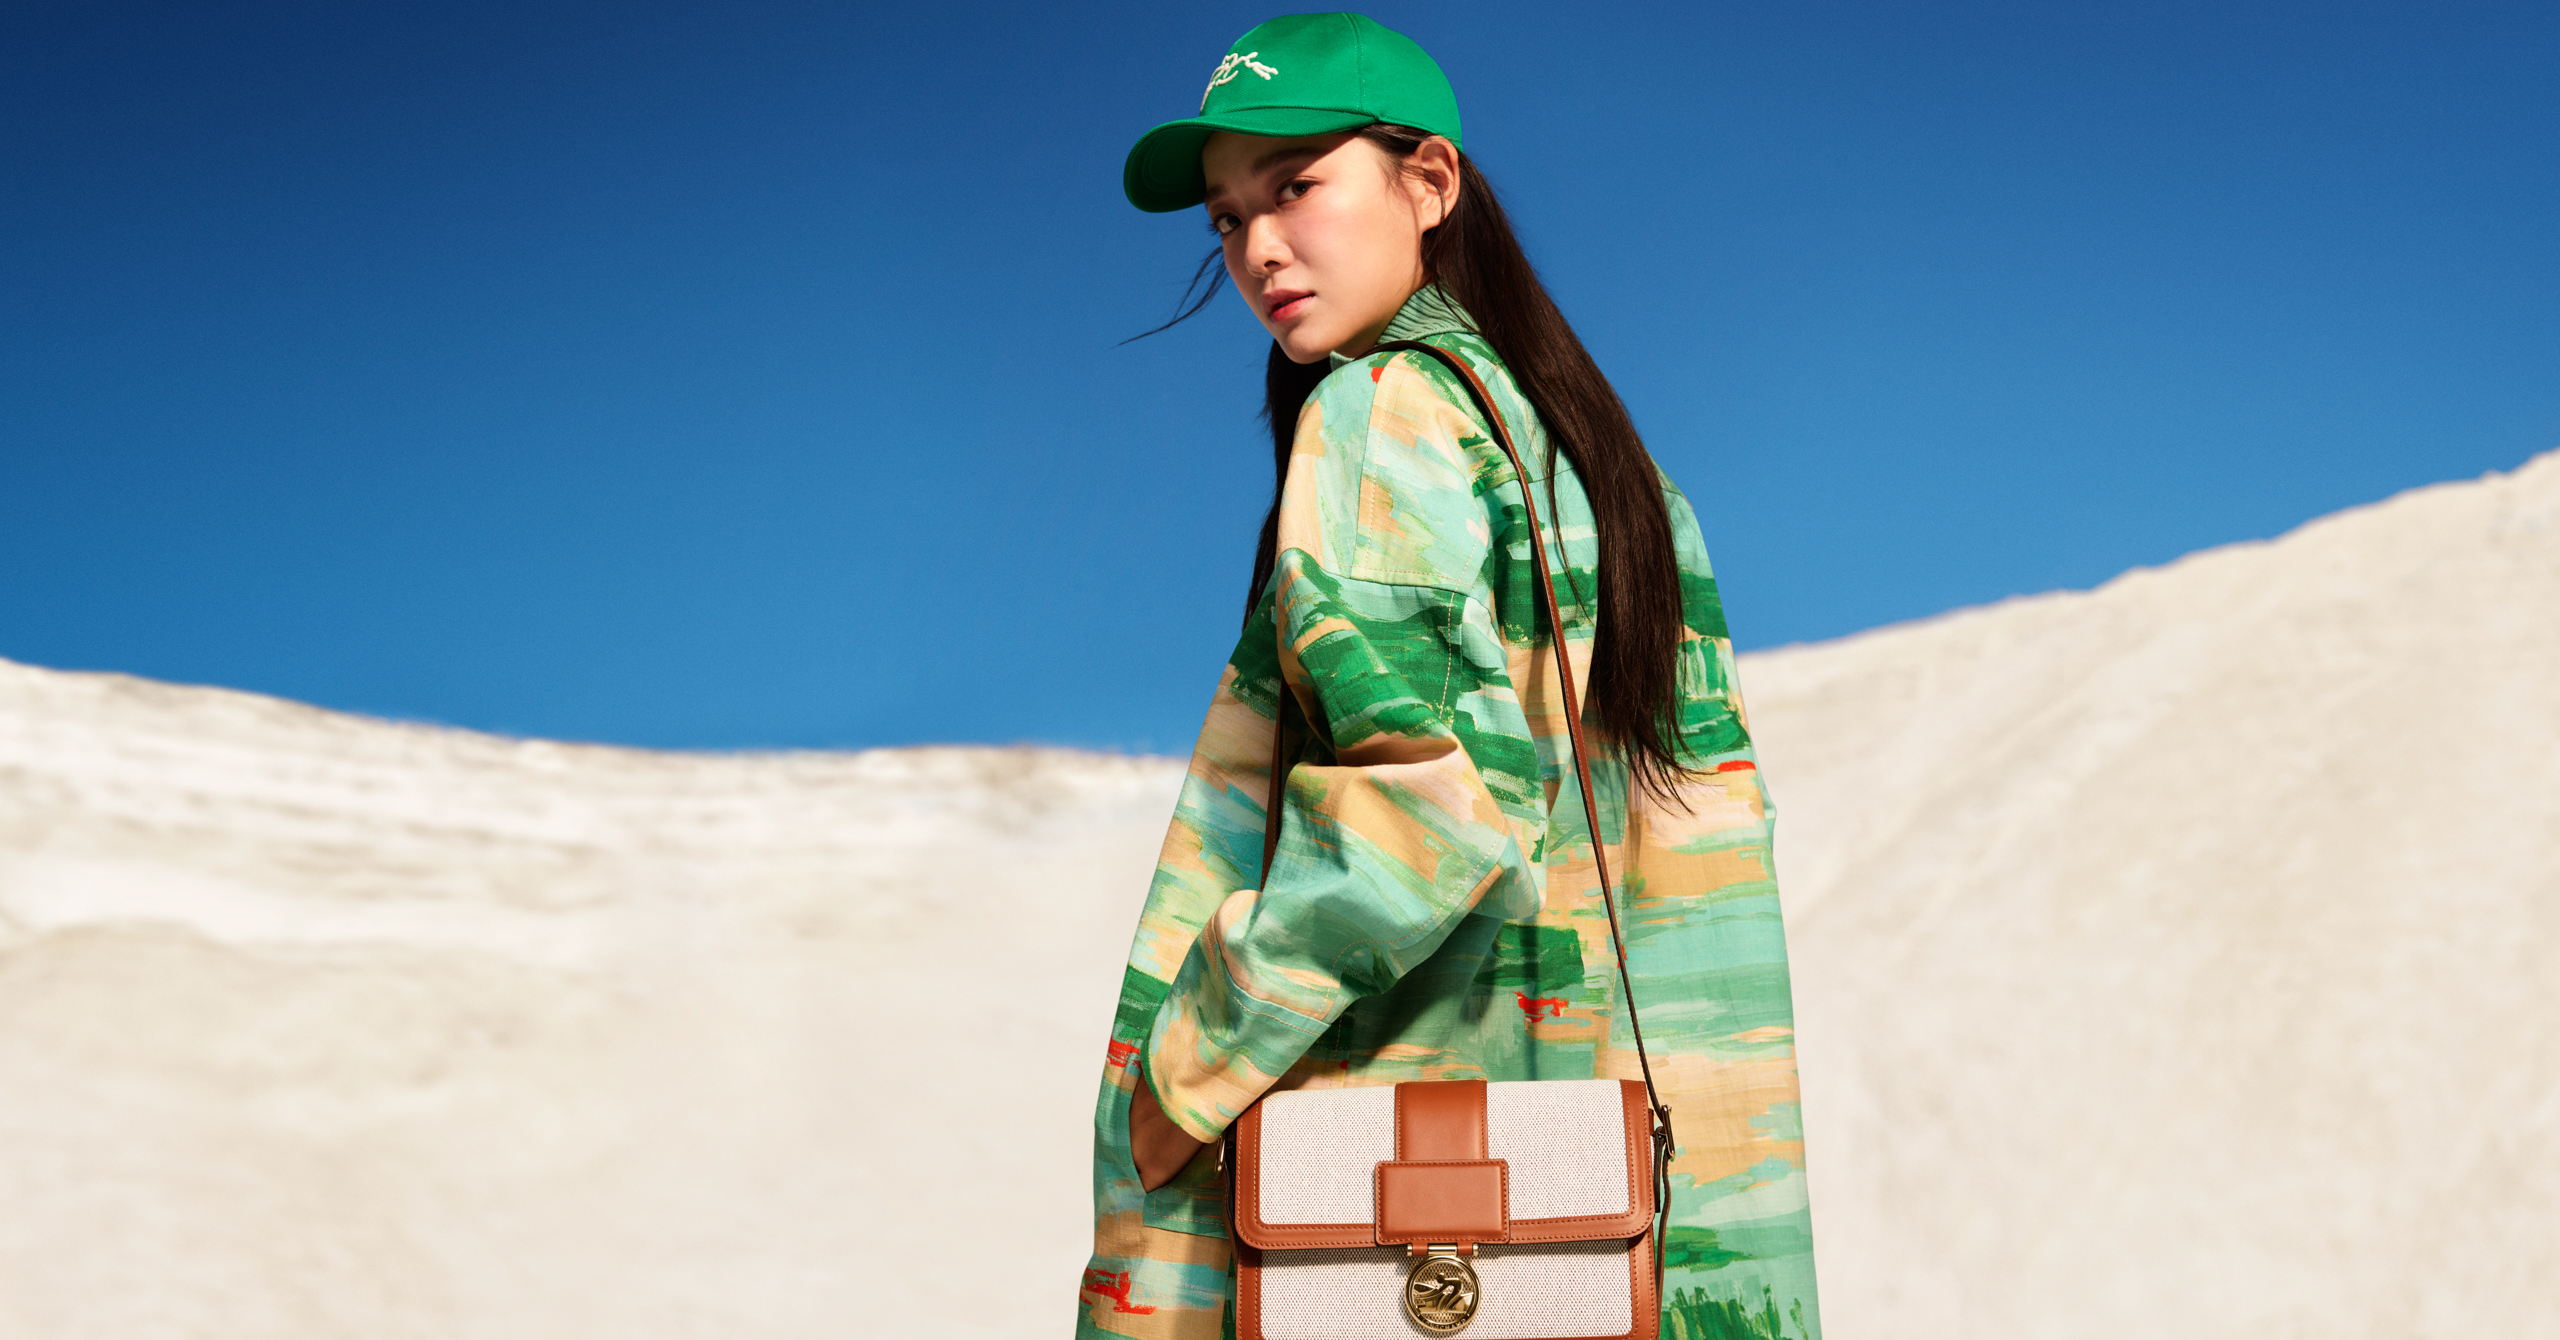 Business Proposal Star Kim Se-jeong Is The New Face Of Longchamp